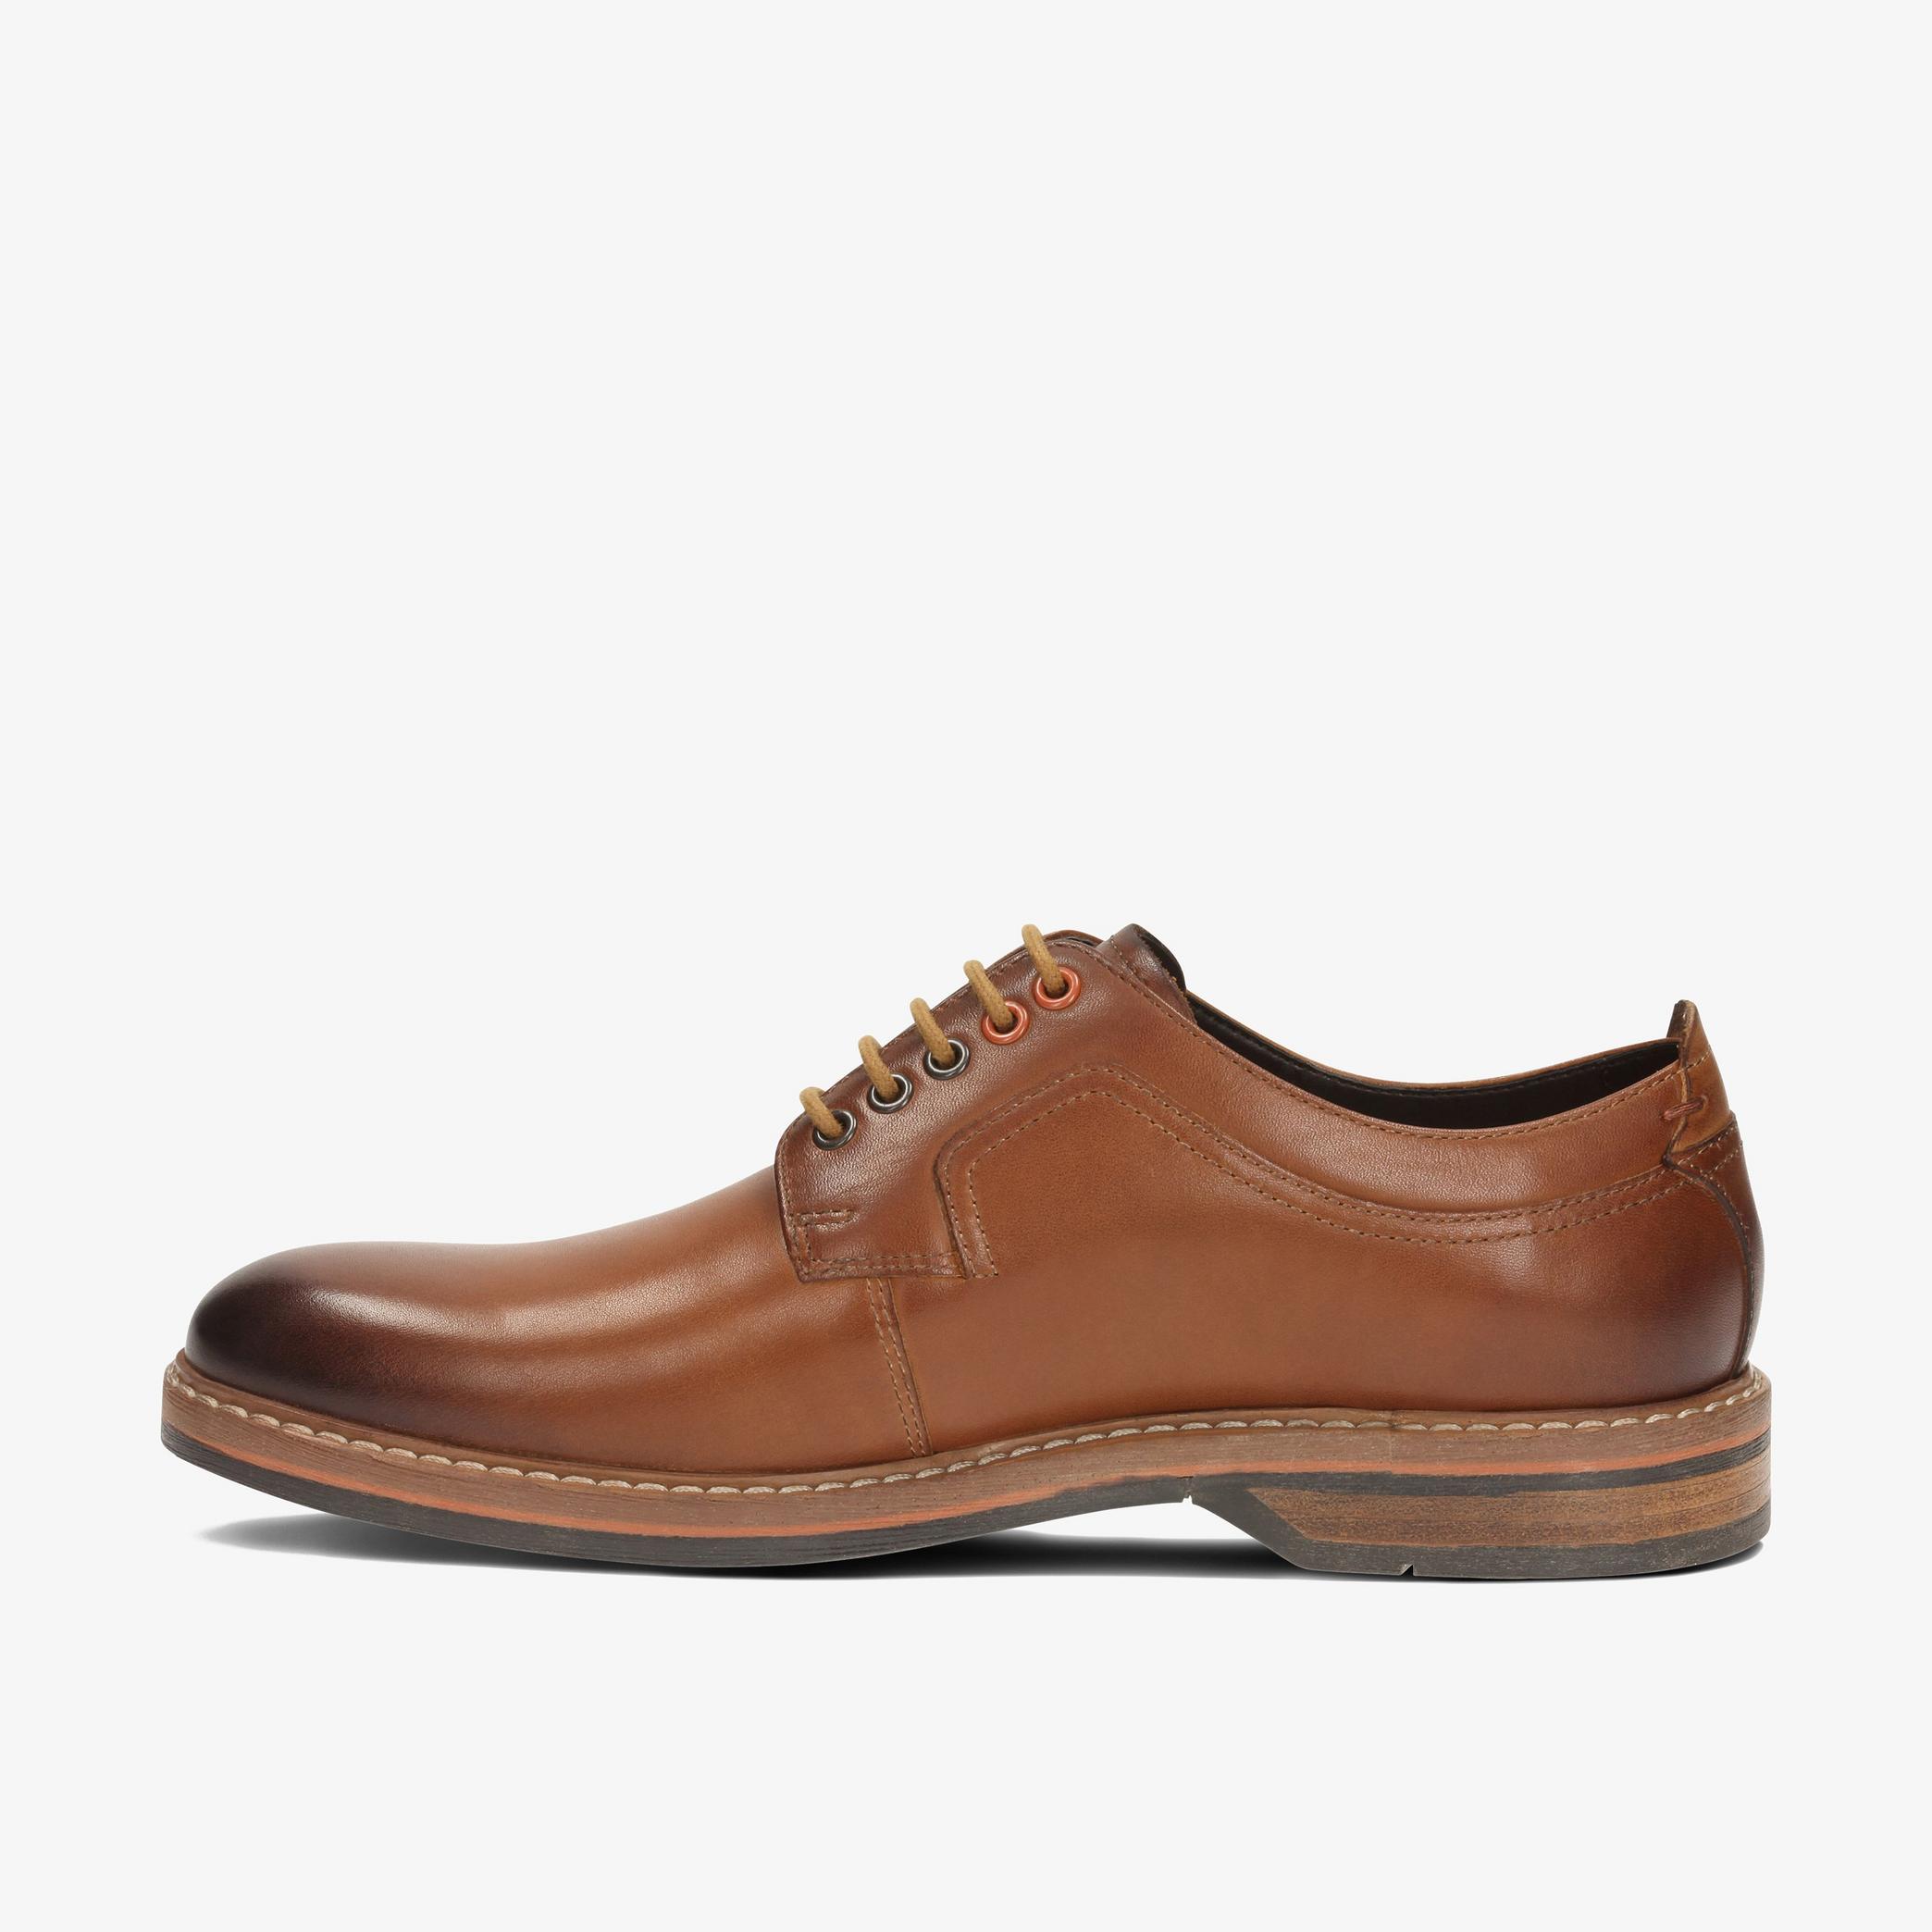 Pitney Walk Cognac Leather Shoes, view 2 of 5